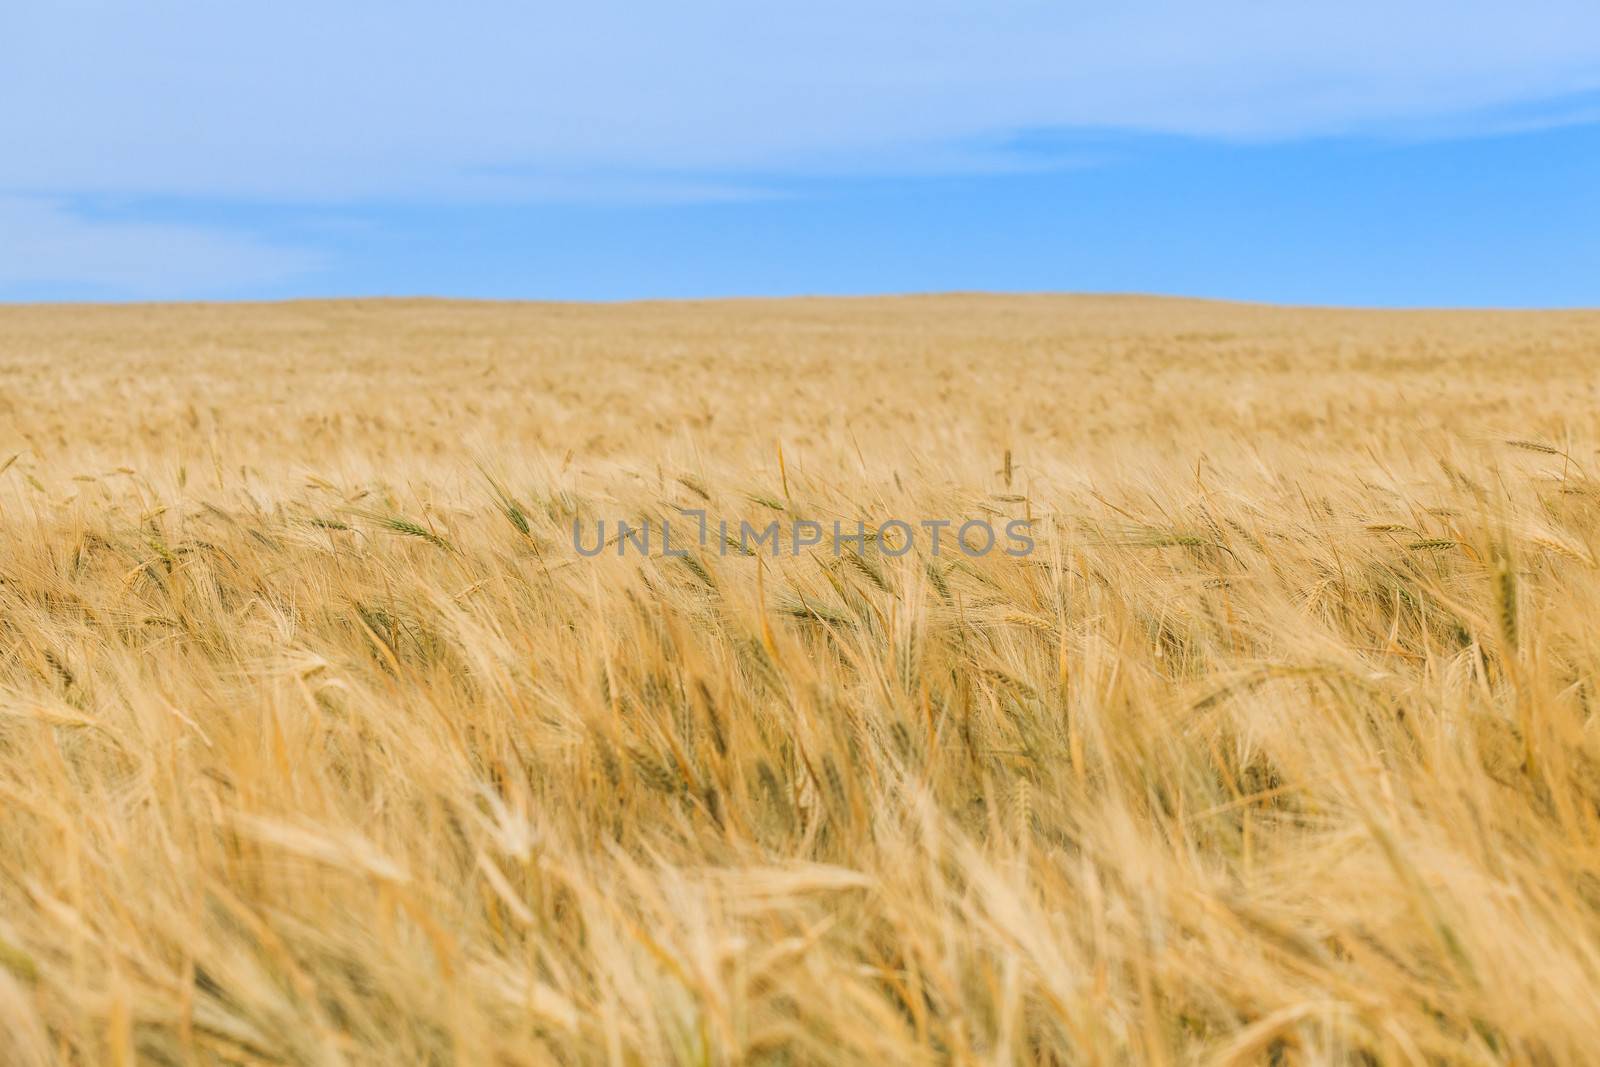 wheat field on a background of blue sky